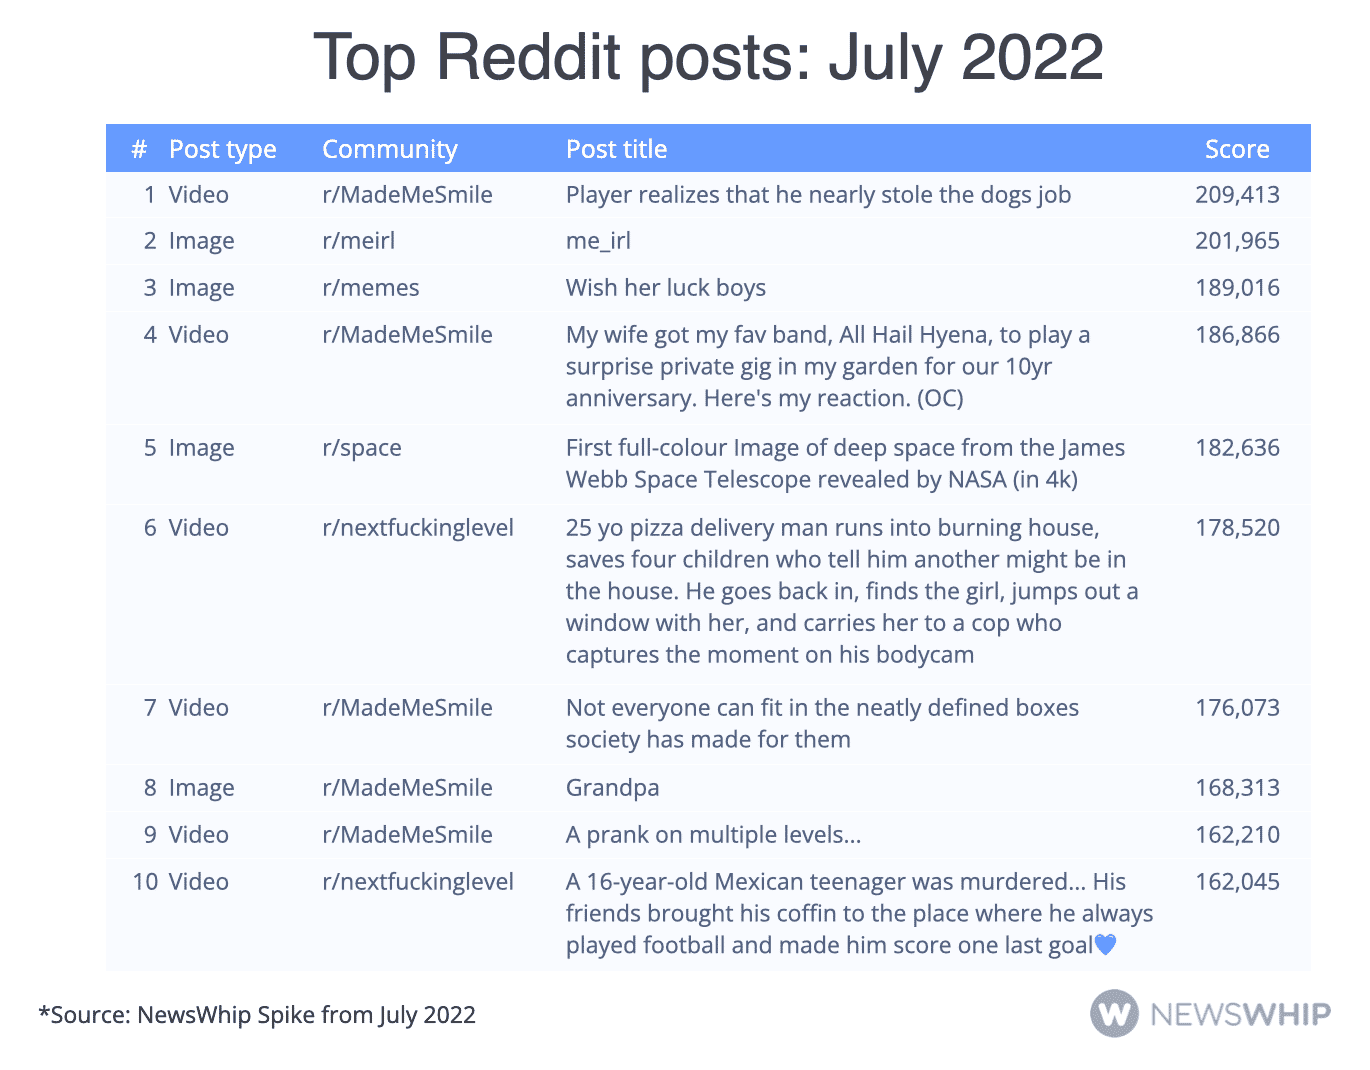 Table showing the top Reddit posts in July 2022, ranked by score